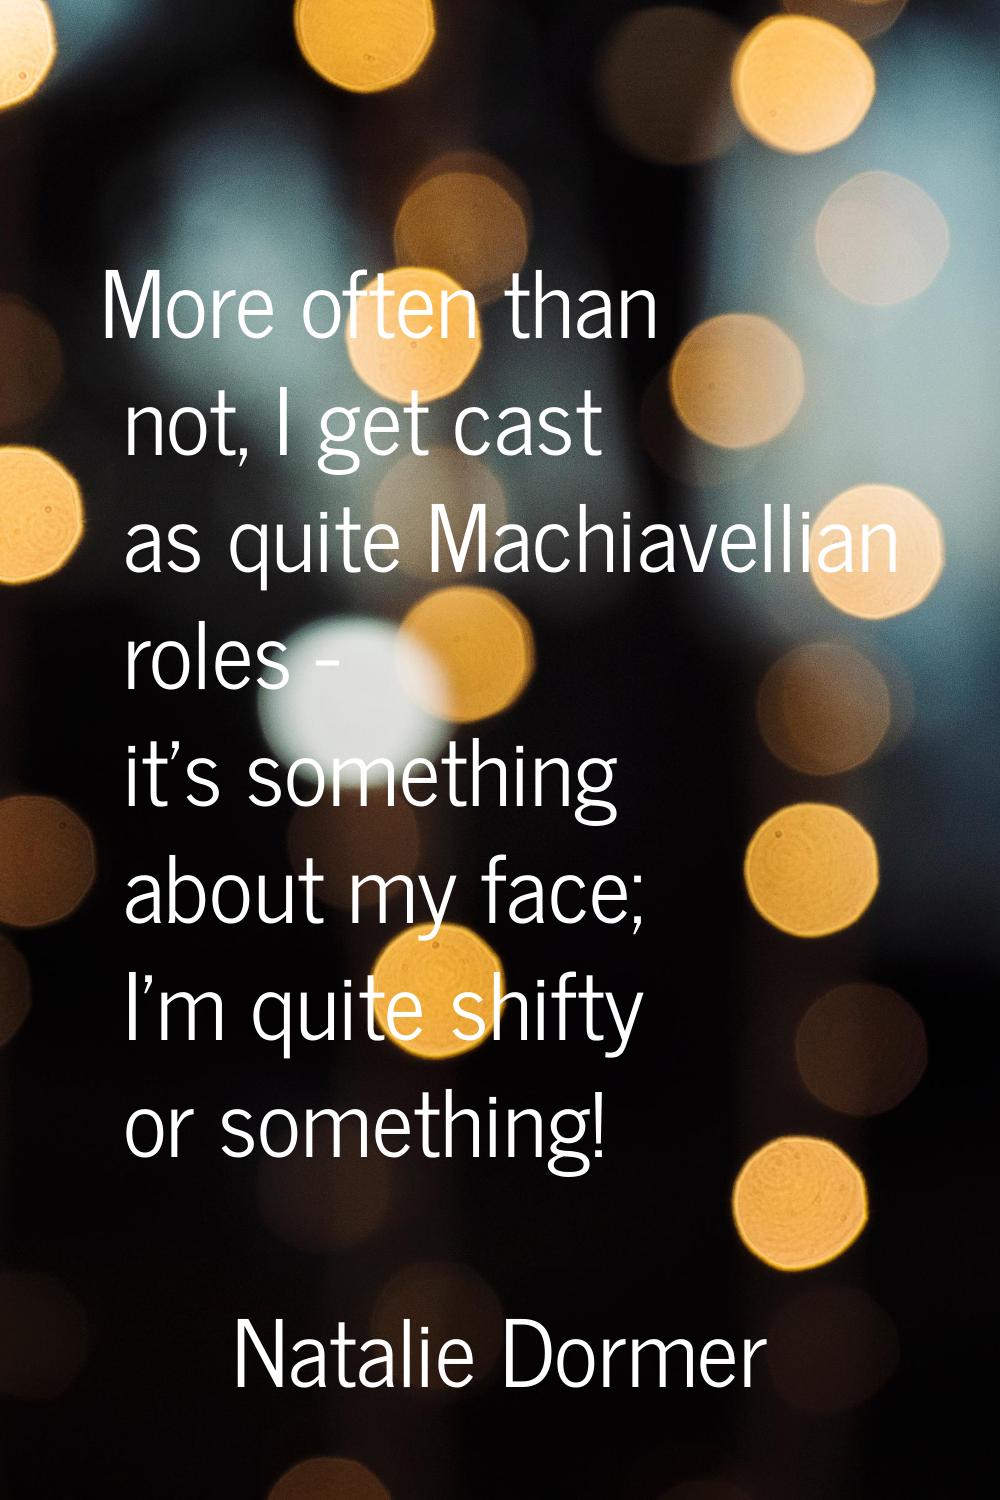 More often than not, I get cast as quite Machiavellian roles - it's something about my face; I'm qu